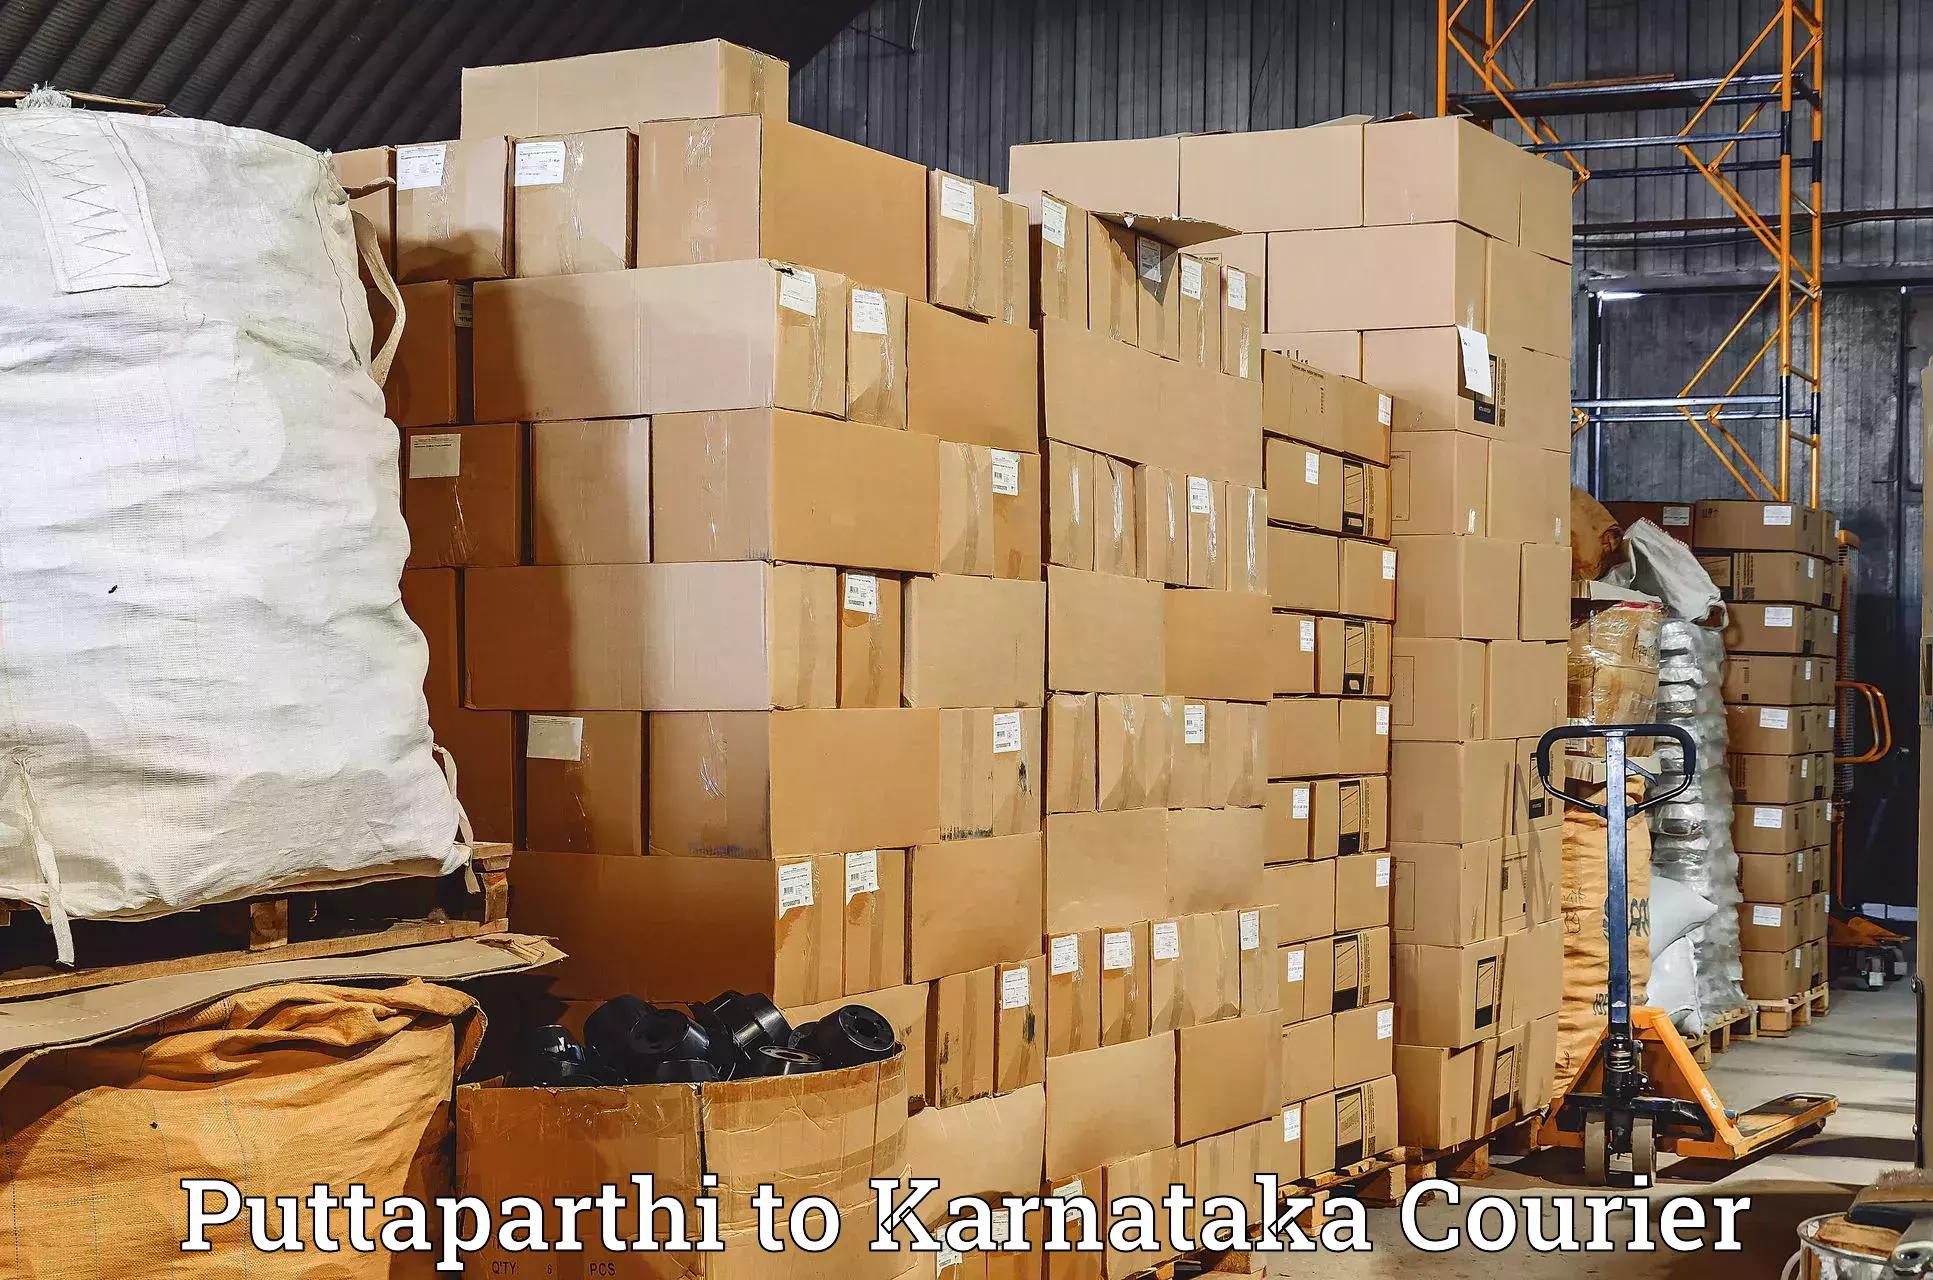 Express delivery capabilities Puttaparthi to Chittapur